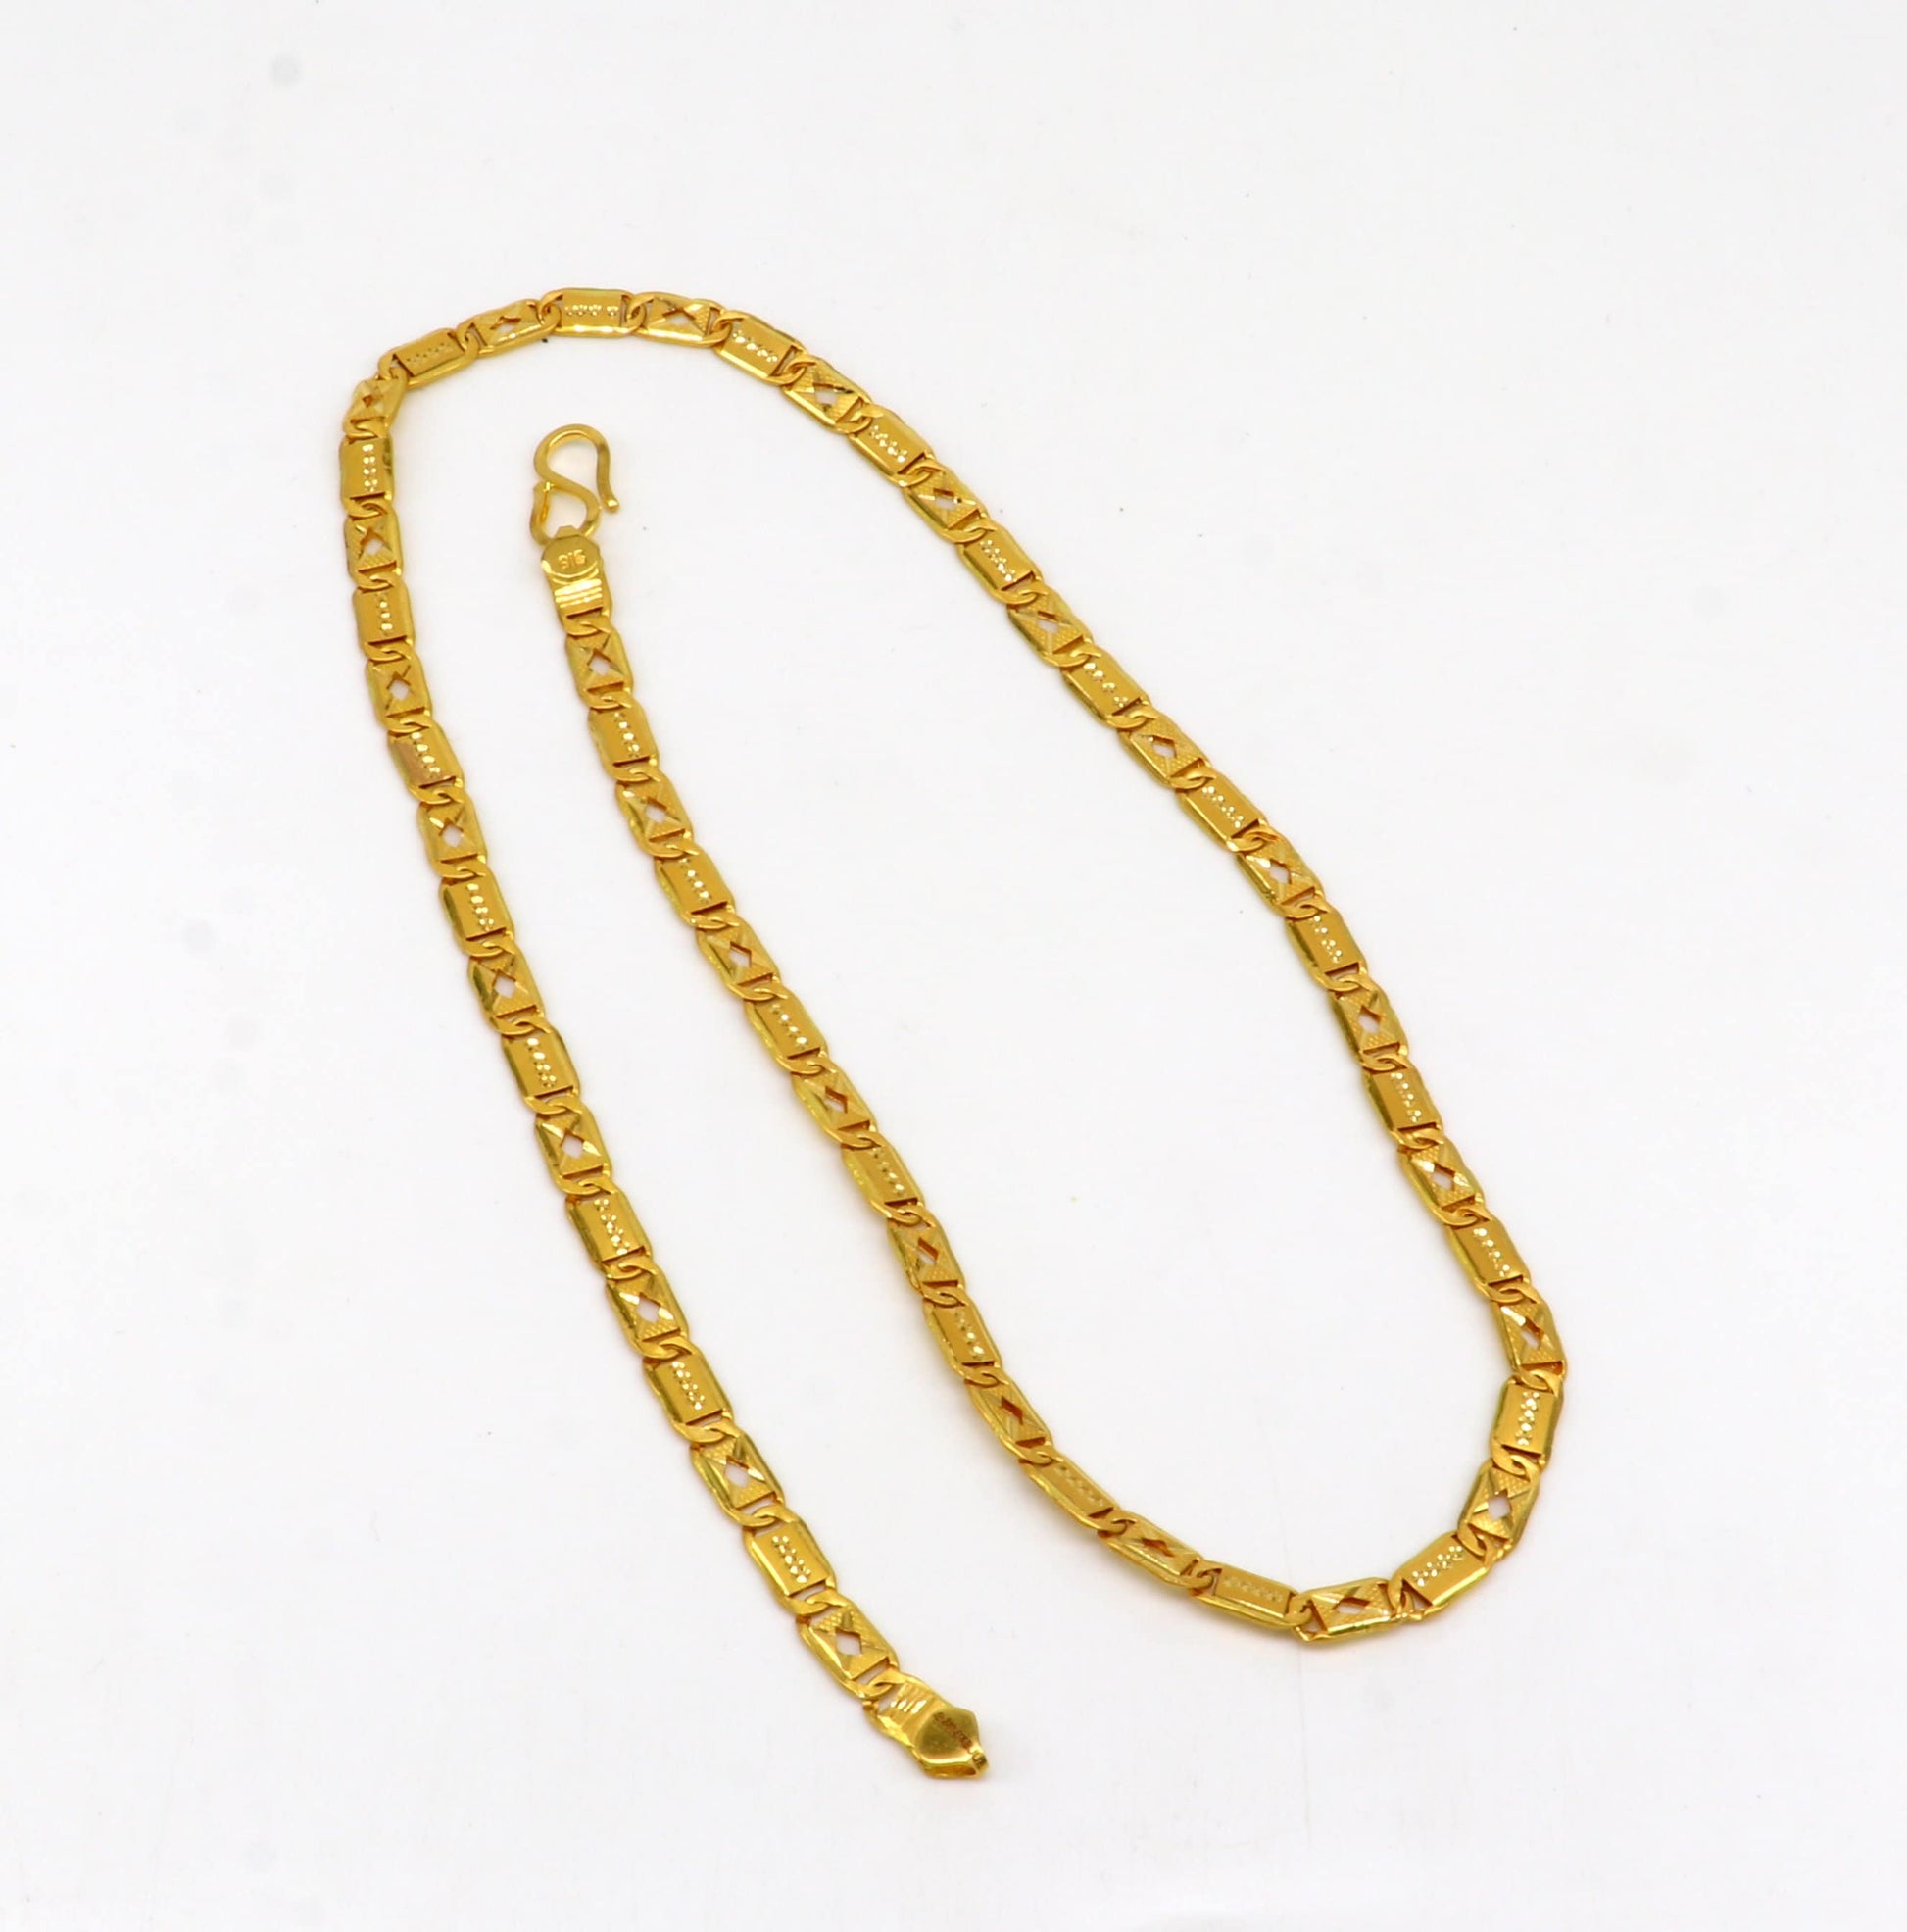 22kt yellow gold royal nawabi baht chain, bar chain, fabulous customized men's chain, men's personalized gifting chain necklace india - TRIBAL ORNAMENTS